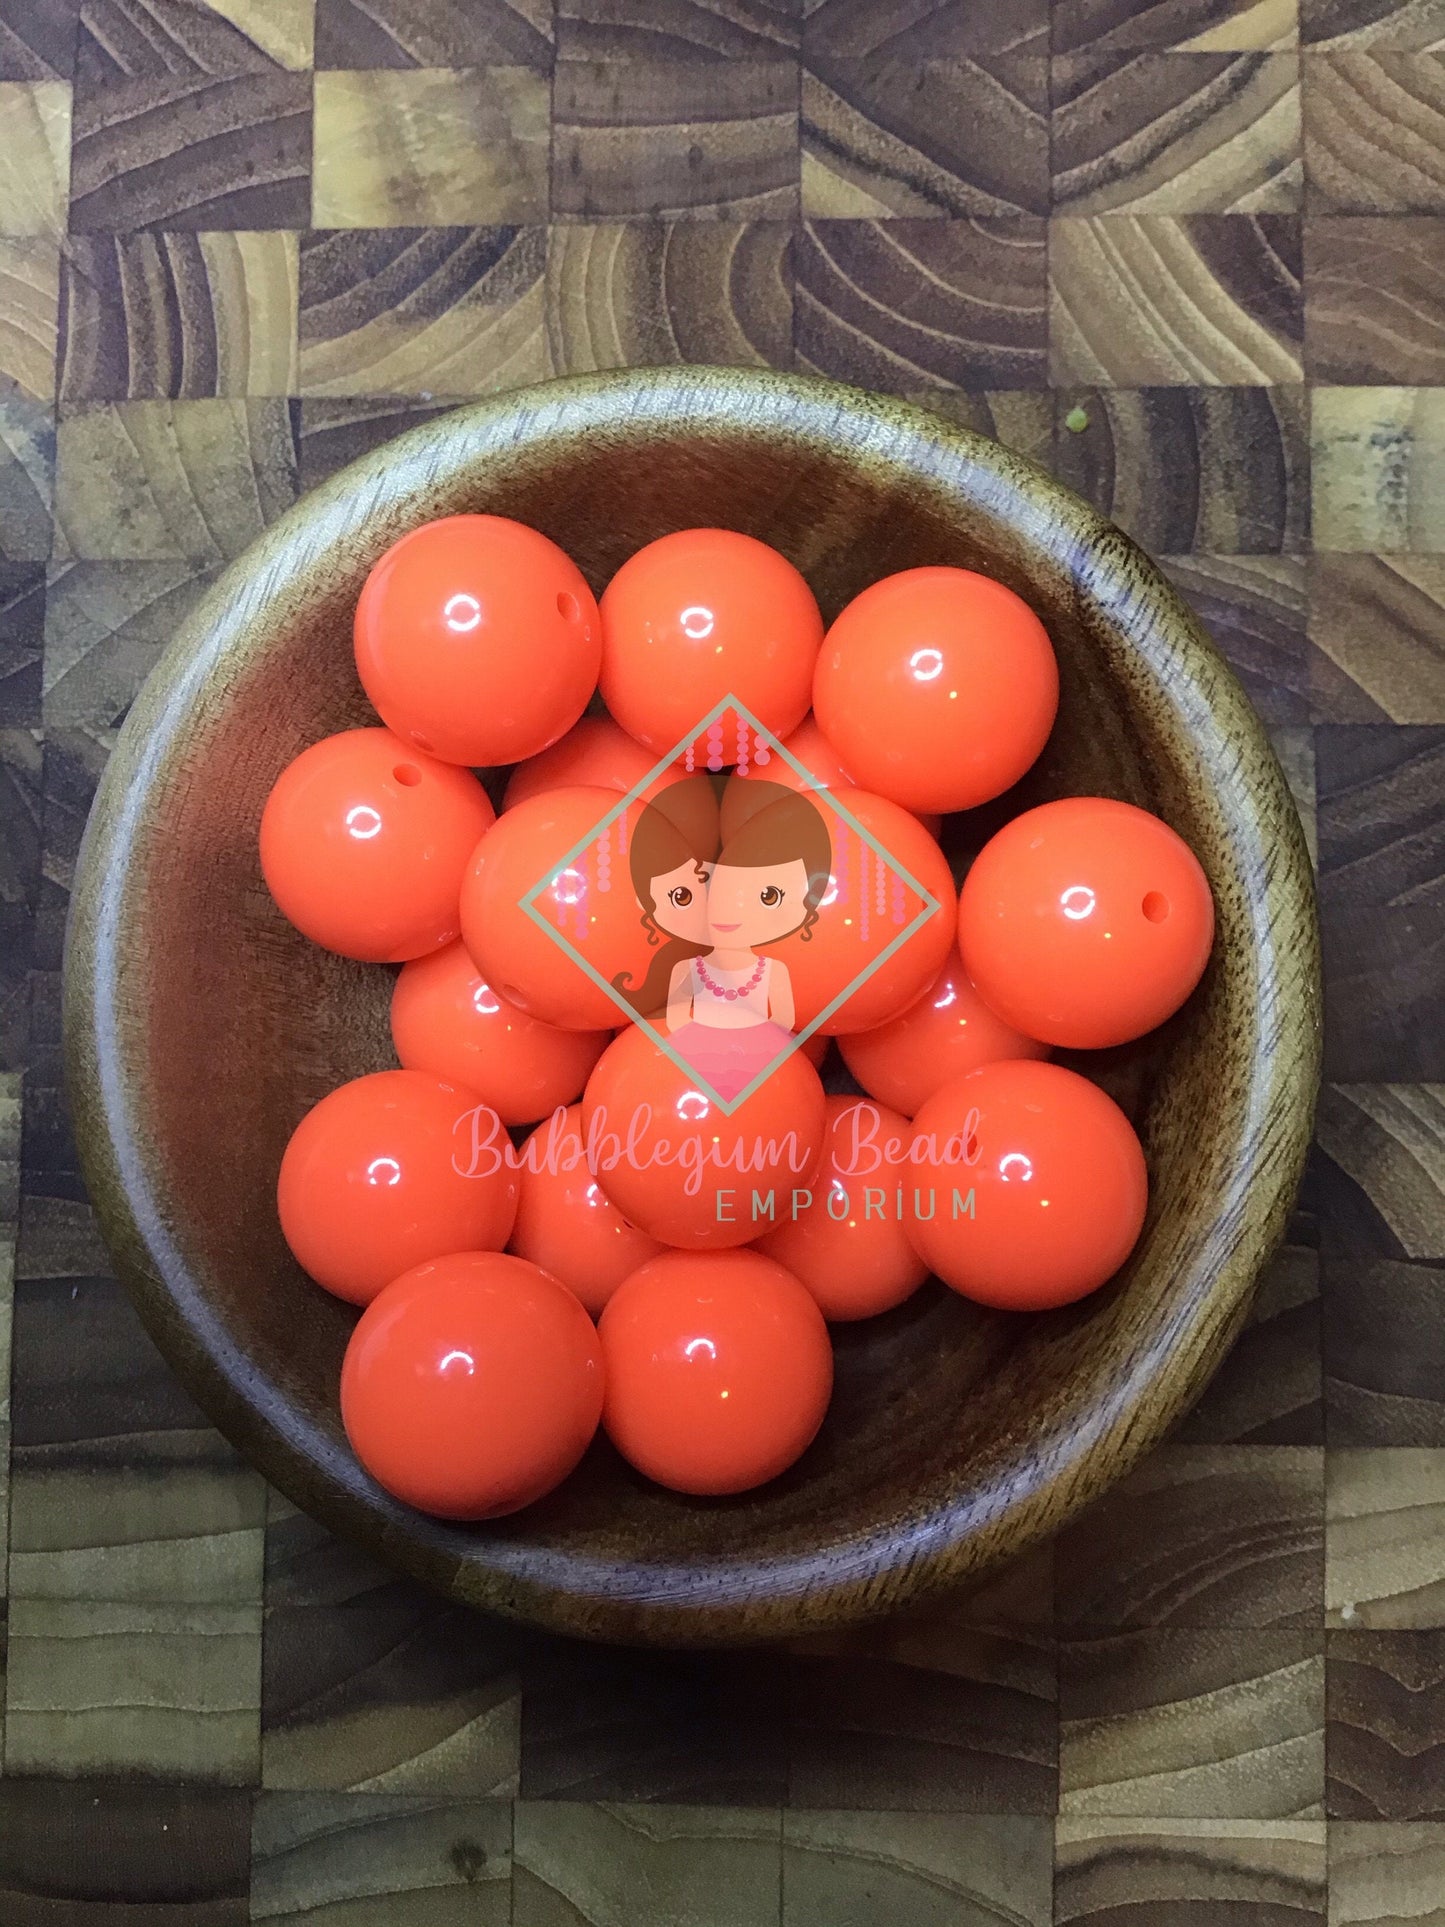 Tangerine Solid Colour Beads